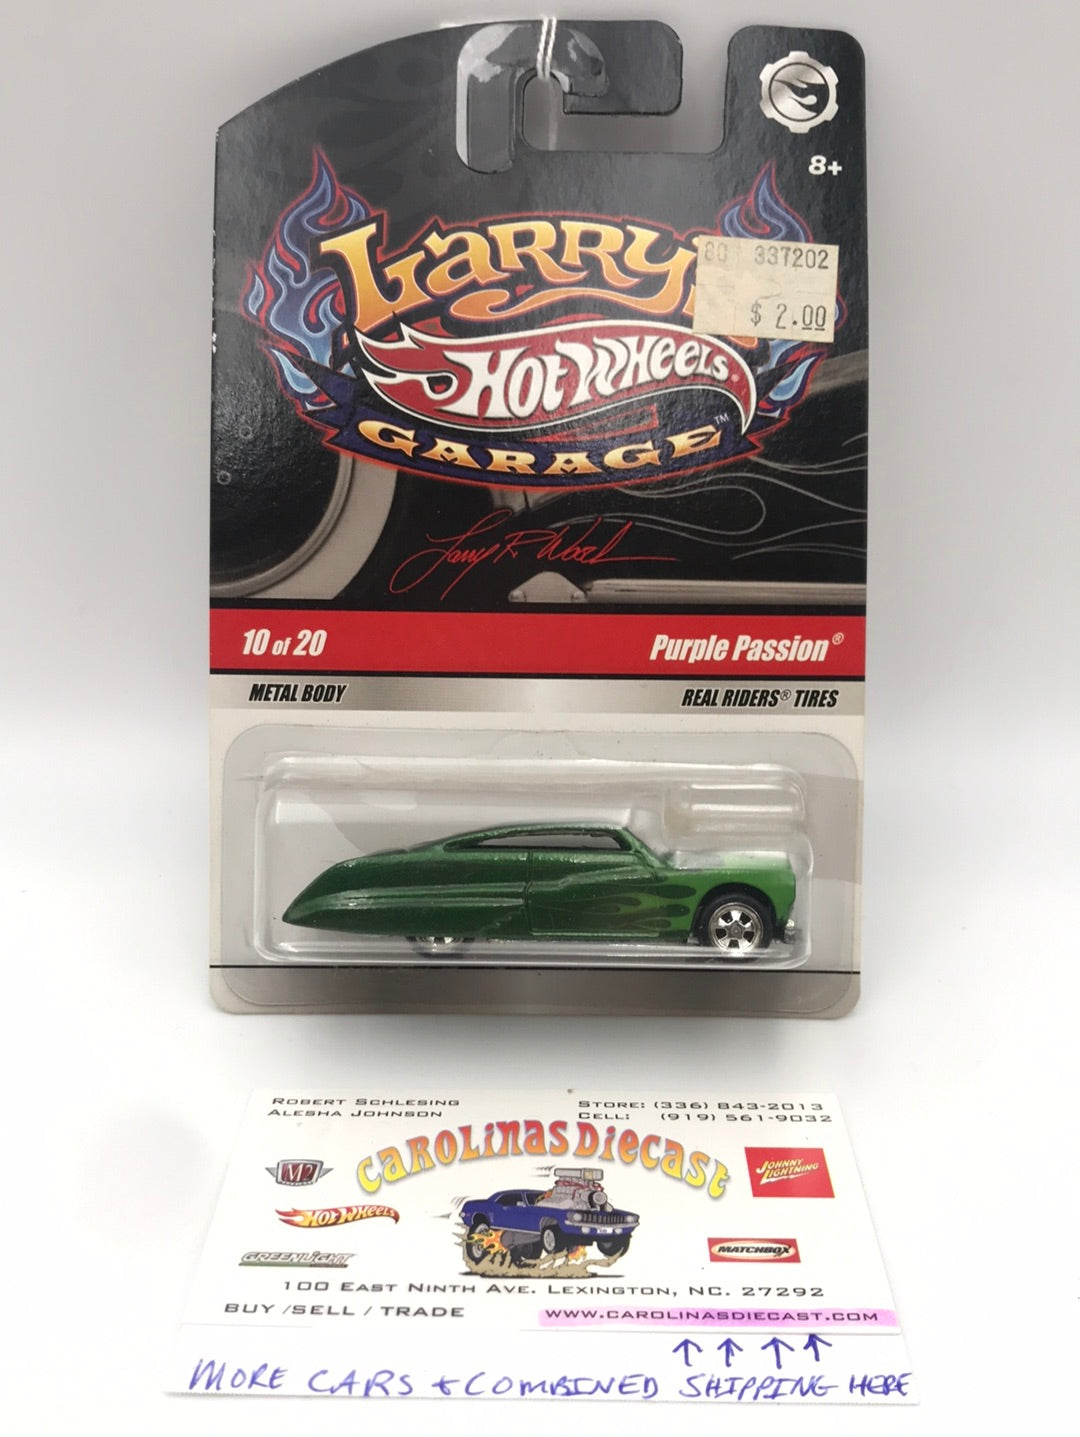 Hot wheels Larrys garage 10 of 20 Purple Passion real riders 265G